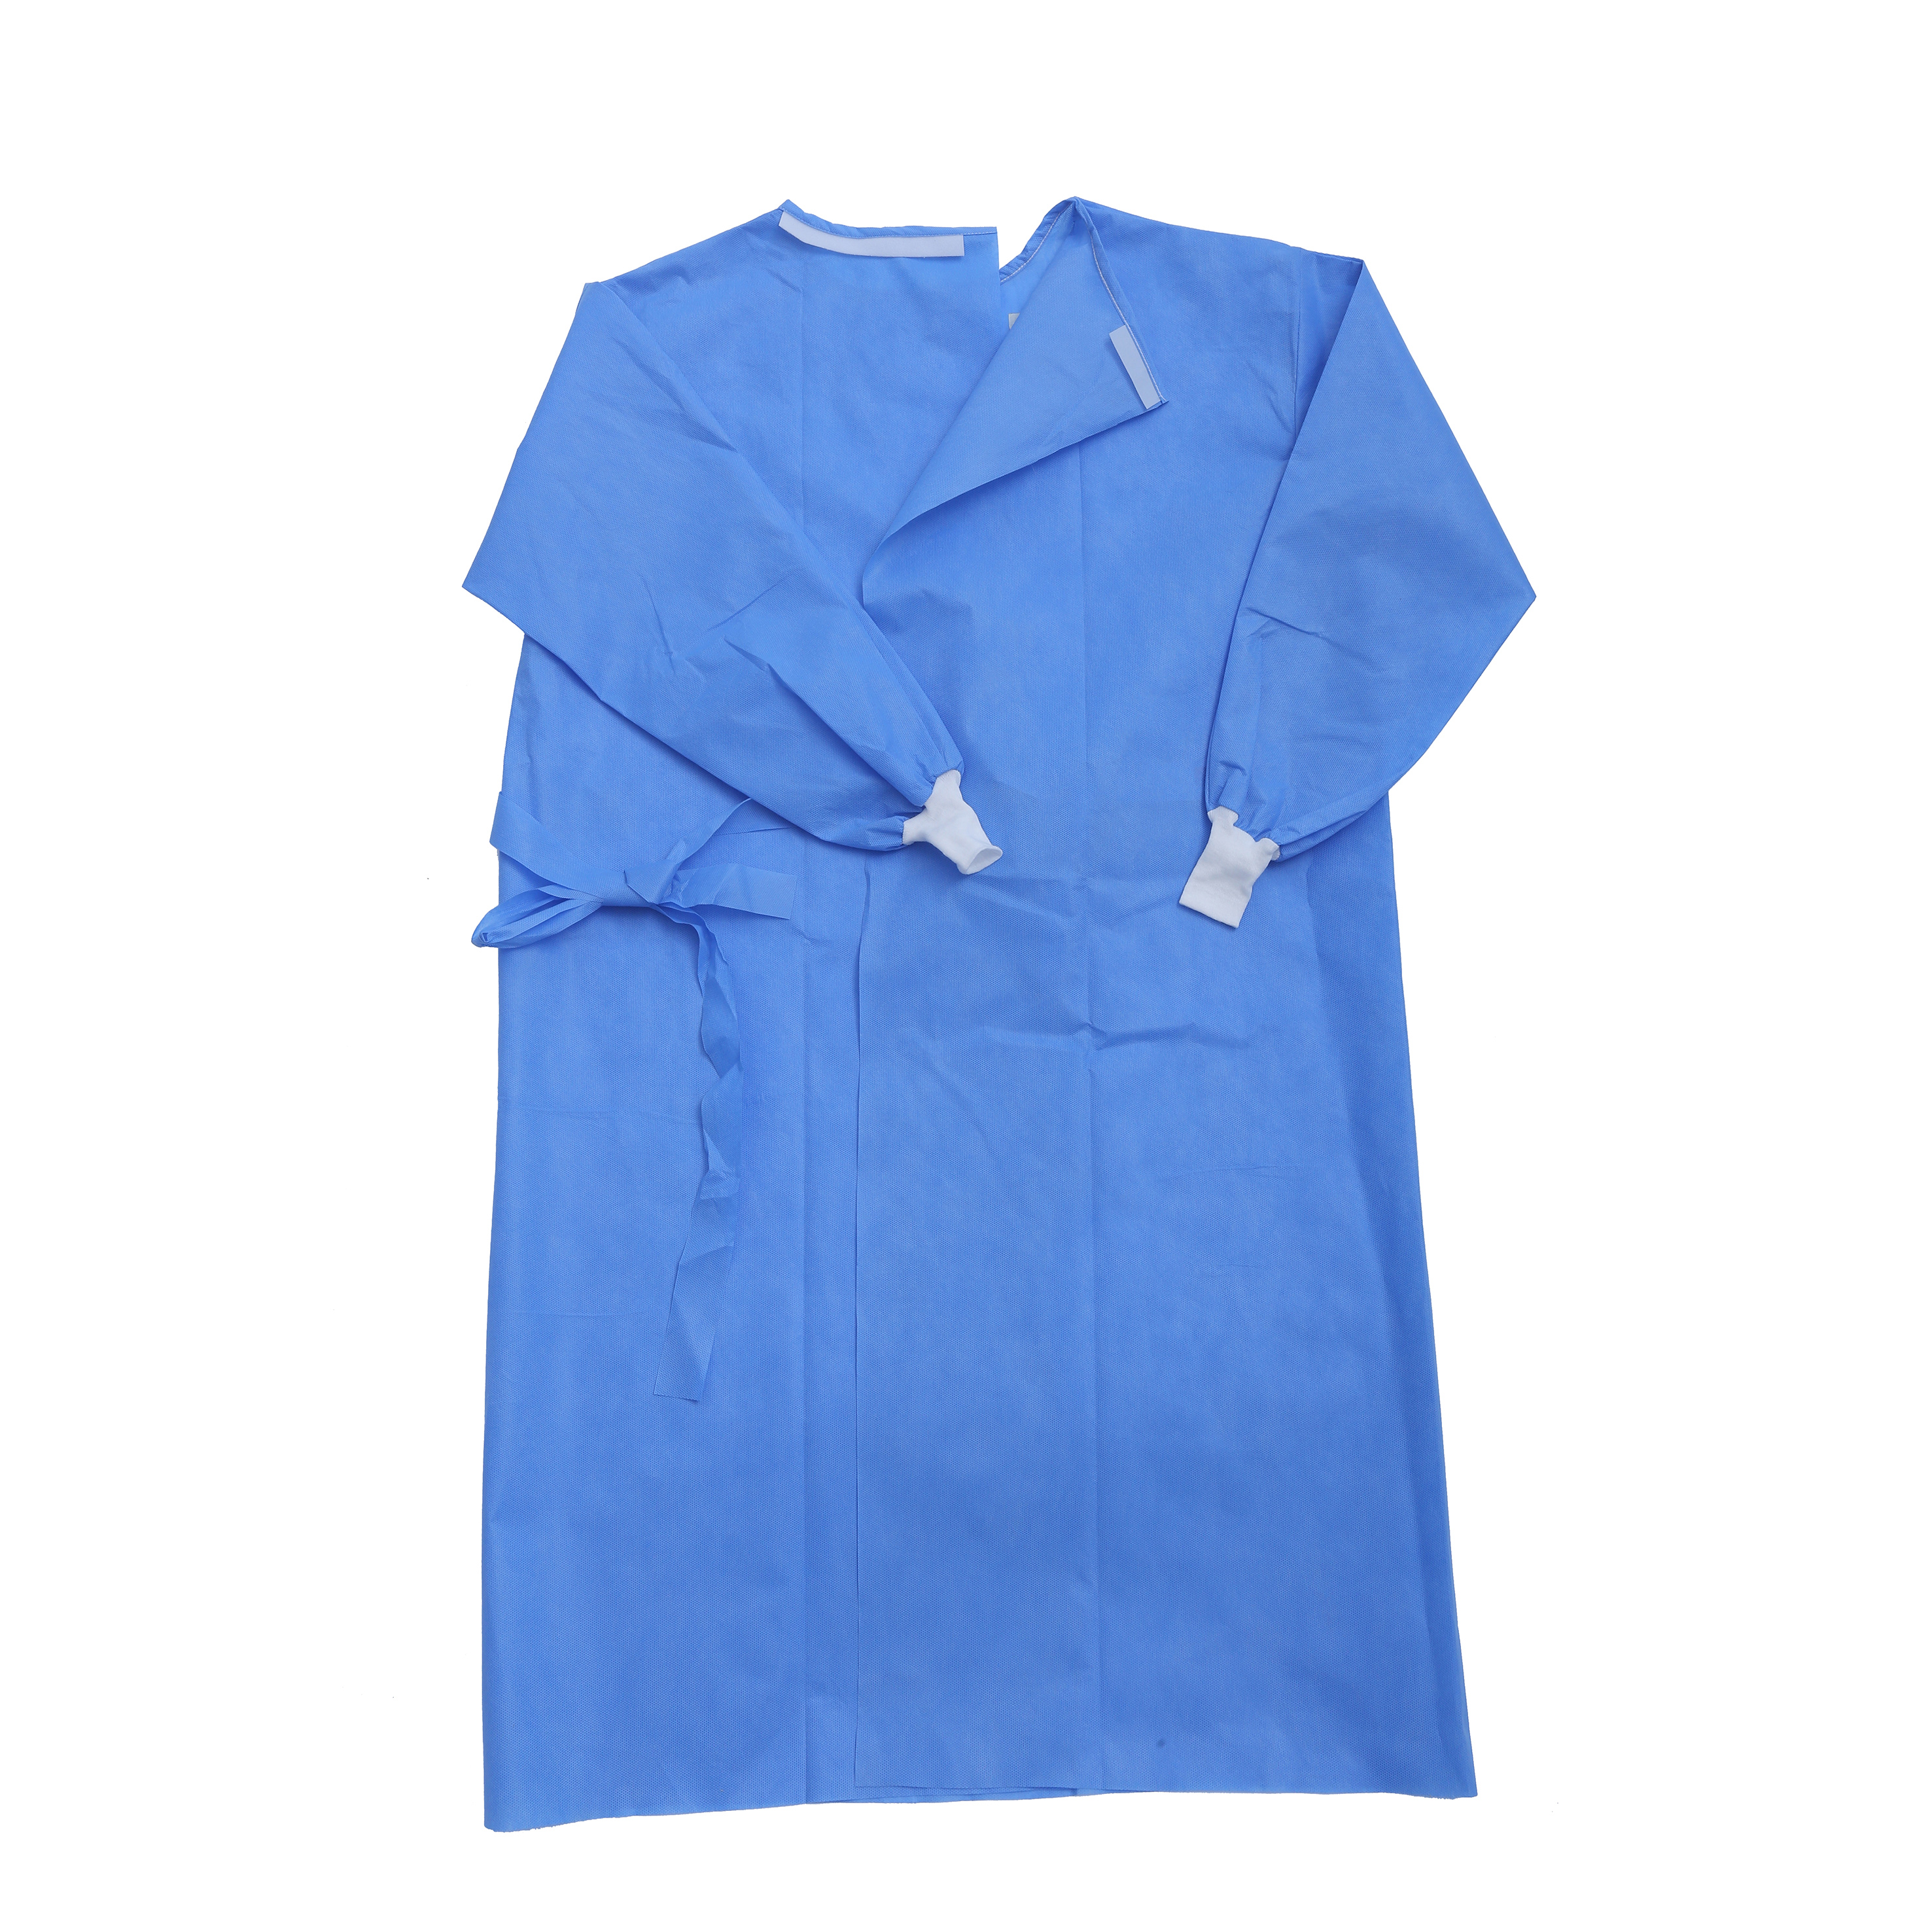 OEM Supply Stationery Buying Agent - Hot Selling Disposable Isolation Gown Medical SMS Disposable Surgical Gown for Hospital – Sellers Union